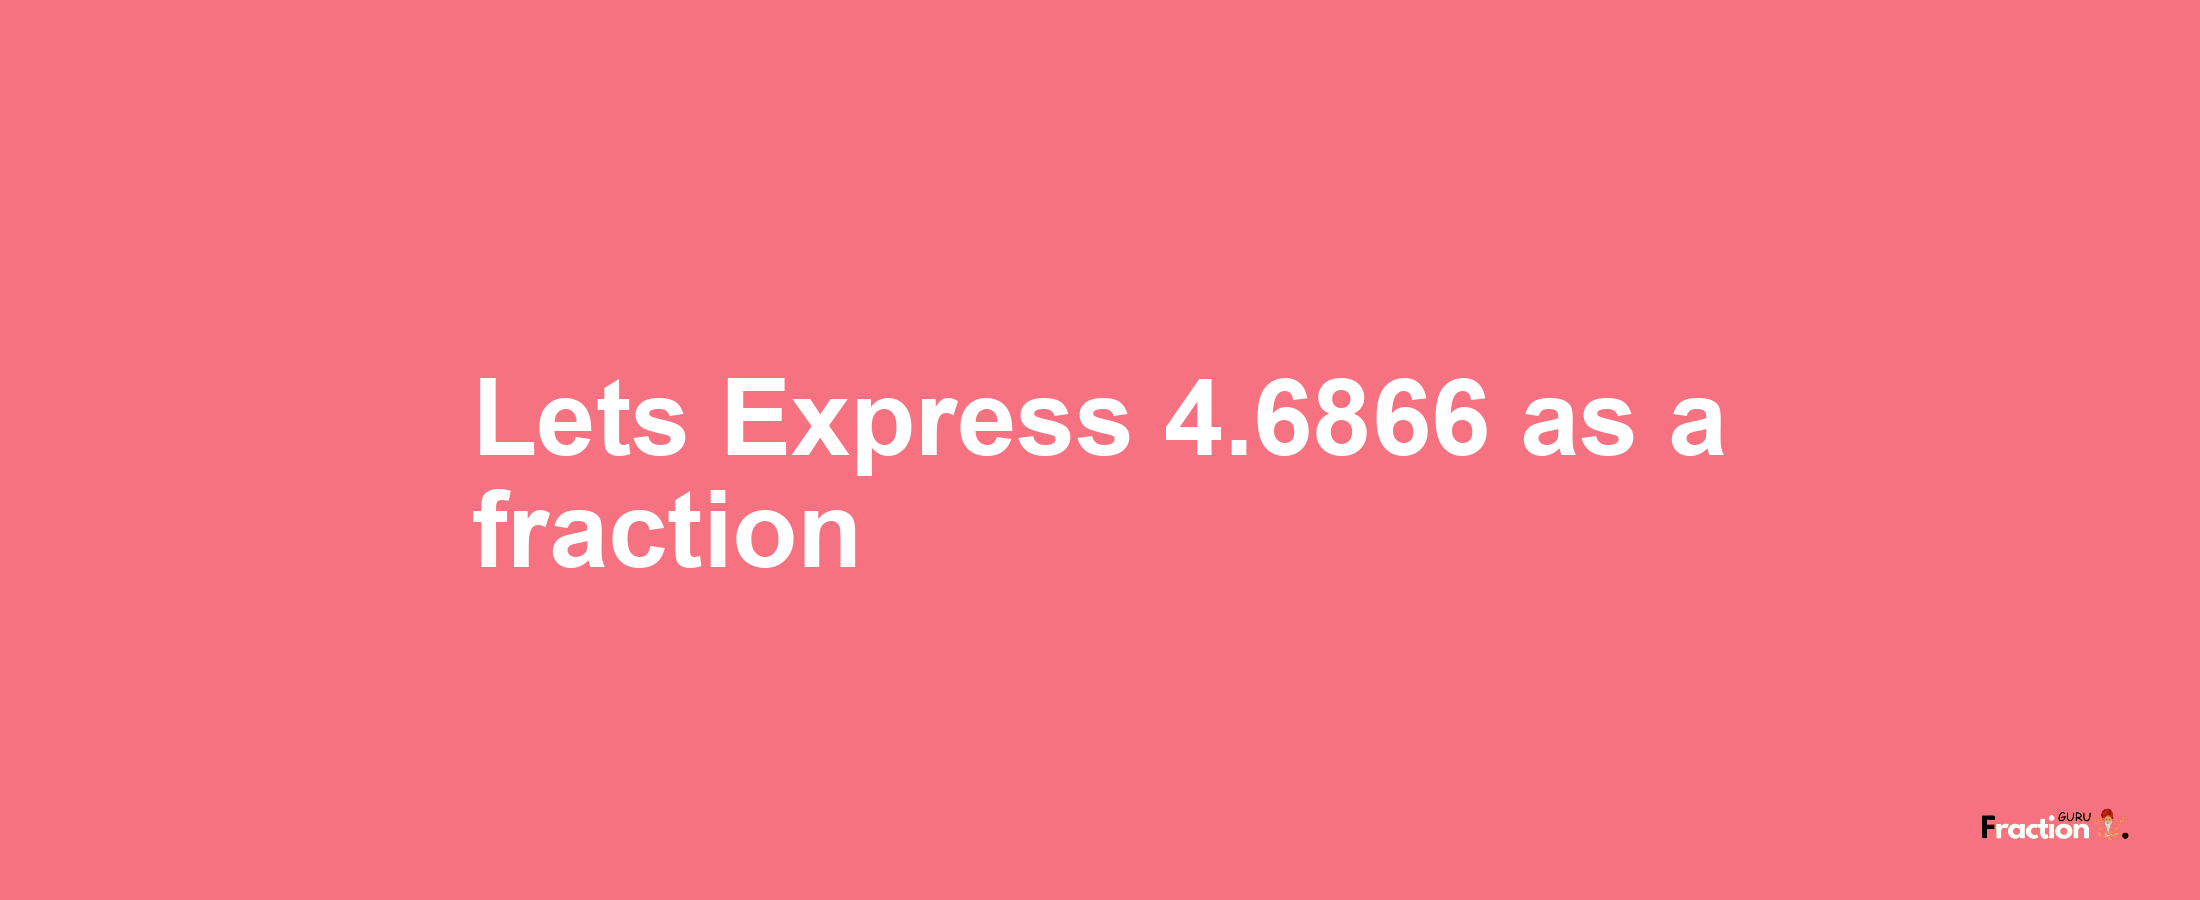 Lets Express 4.6866 as afraction